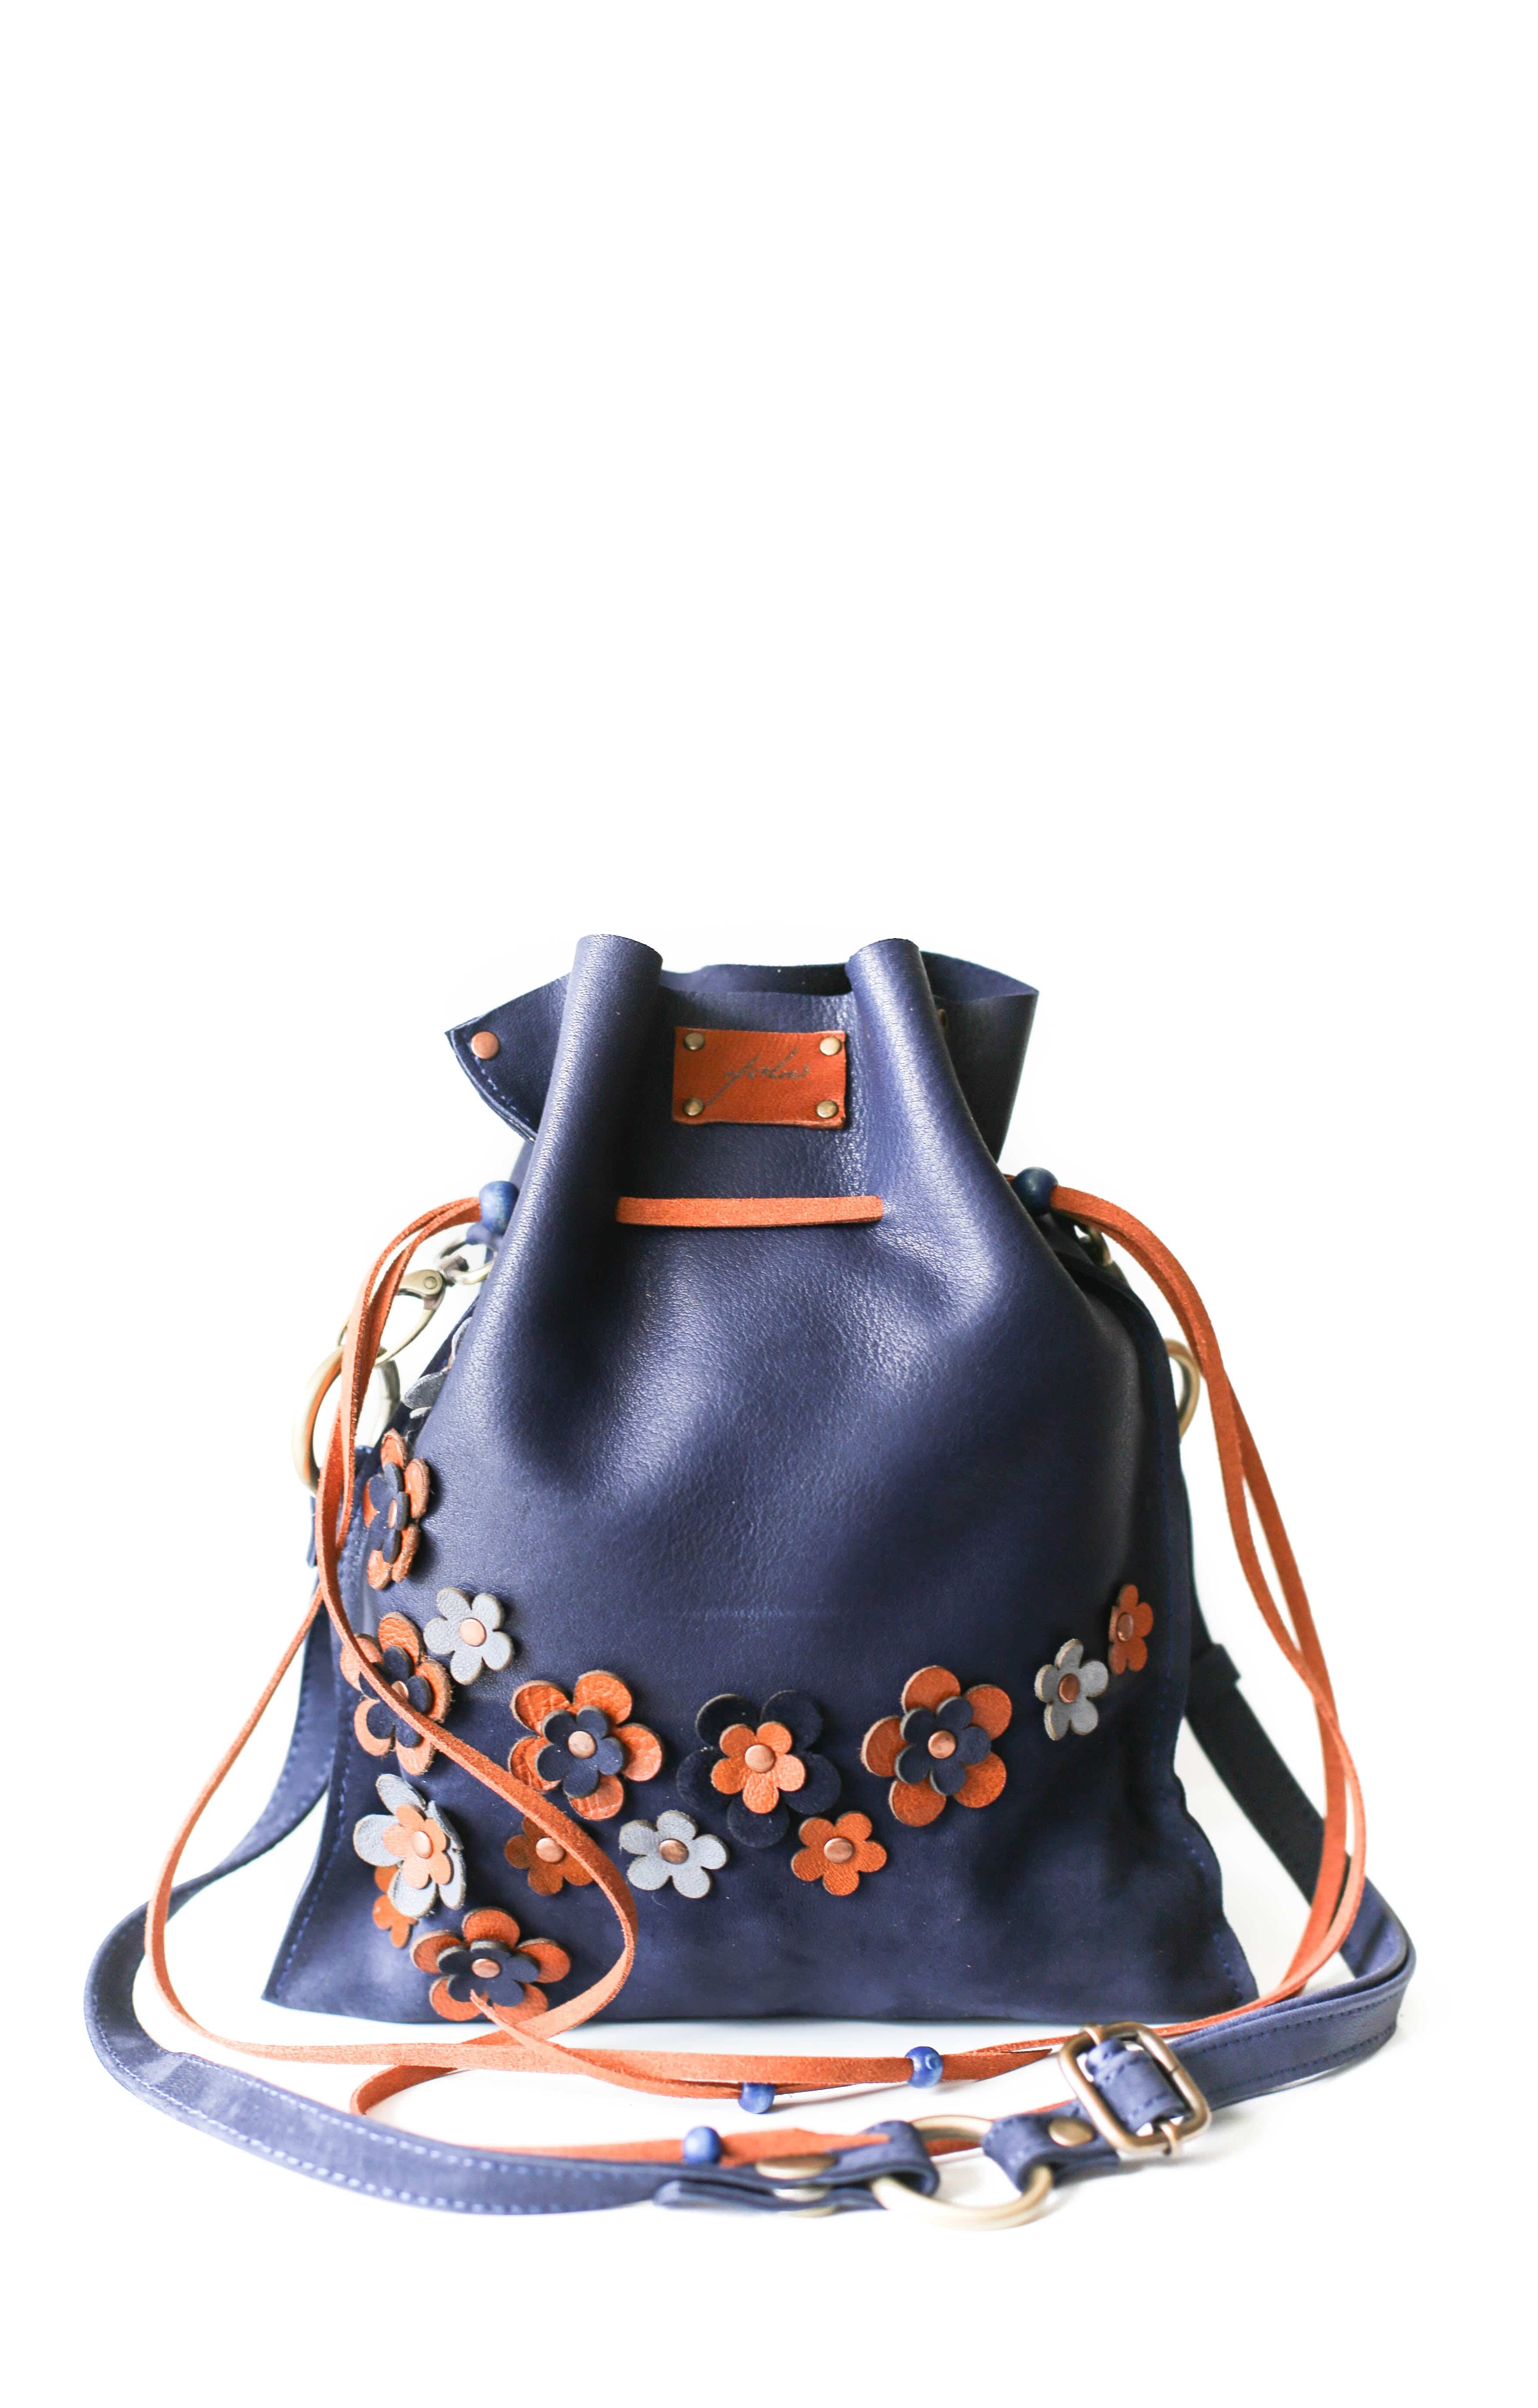 Blue Drawstring Leather Pouch Bag - Qisabags with Chain / Both Straps